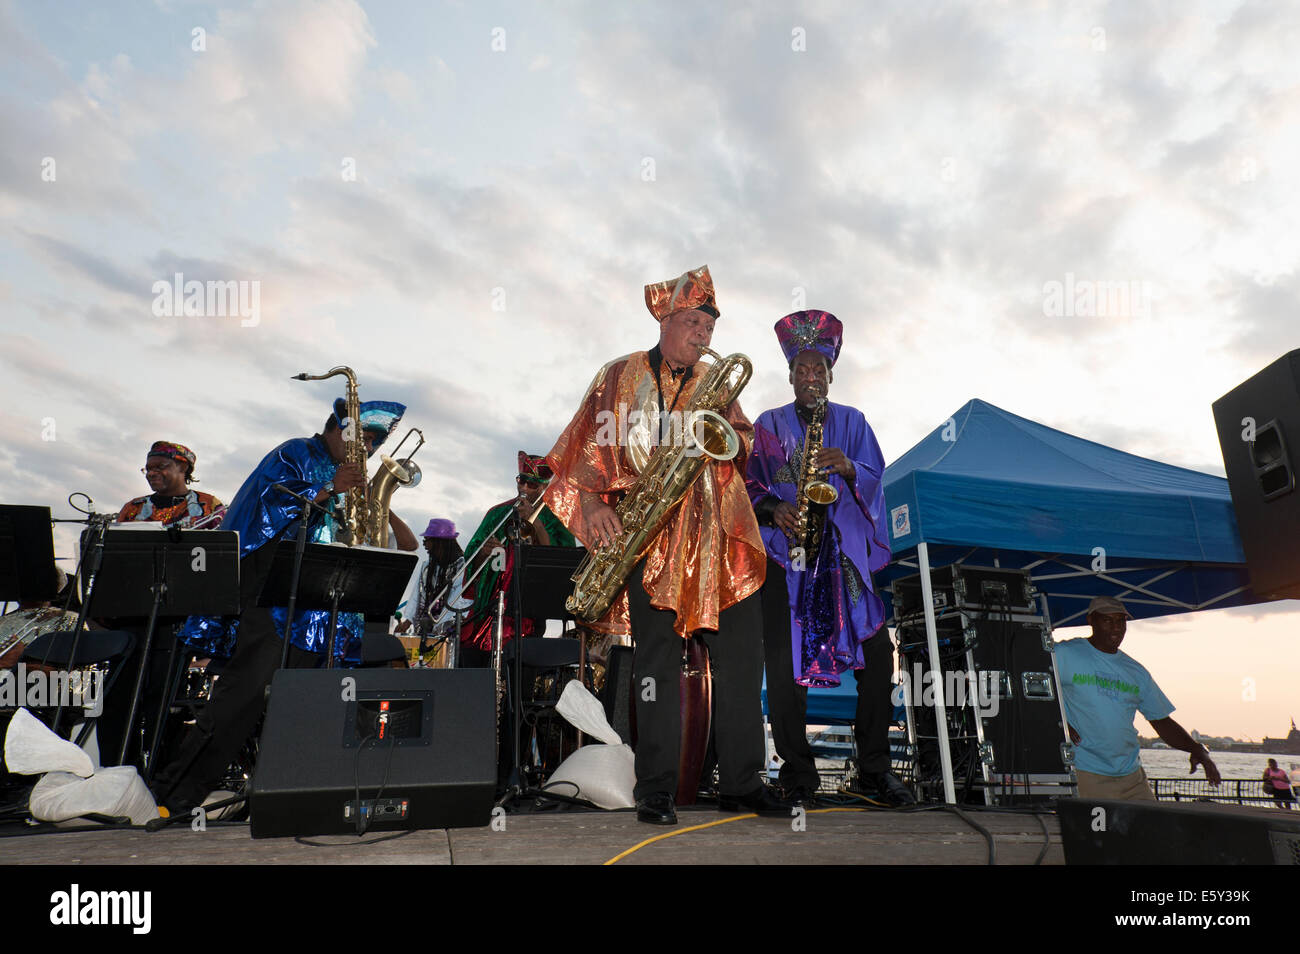 New York, USA. 7th August, 2014.  In a park next to the Hudson River, the Sun Ra Arkestra played a jazz concert in Battery Park City on Aug. 7, 2014. This would have been the 100th birthday of Sun Ra, the Arketra's founder. Credit:  Terese Loeb Kreuzer/Alamy Live News Stock Photo